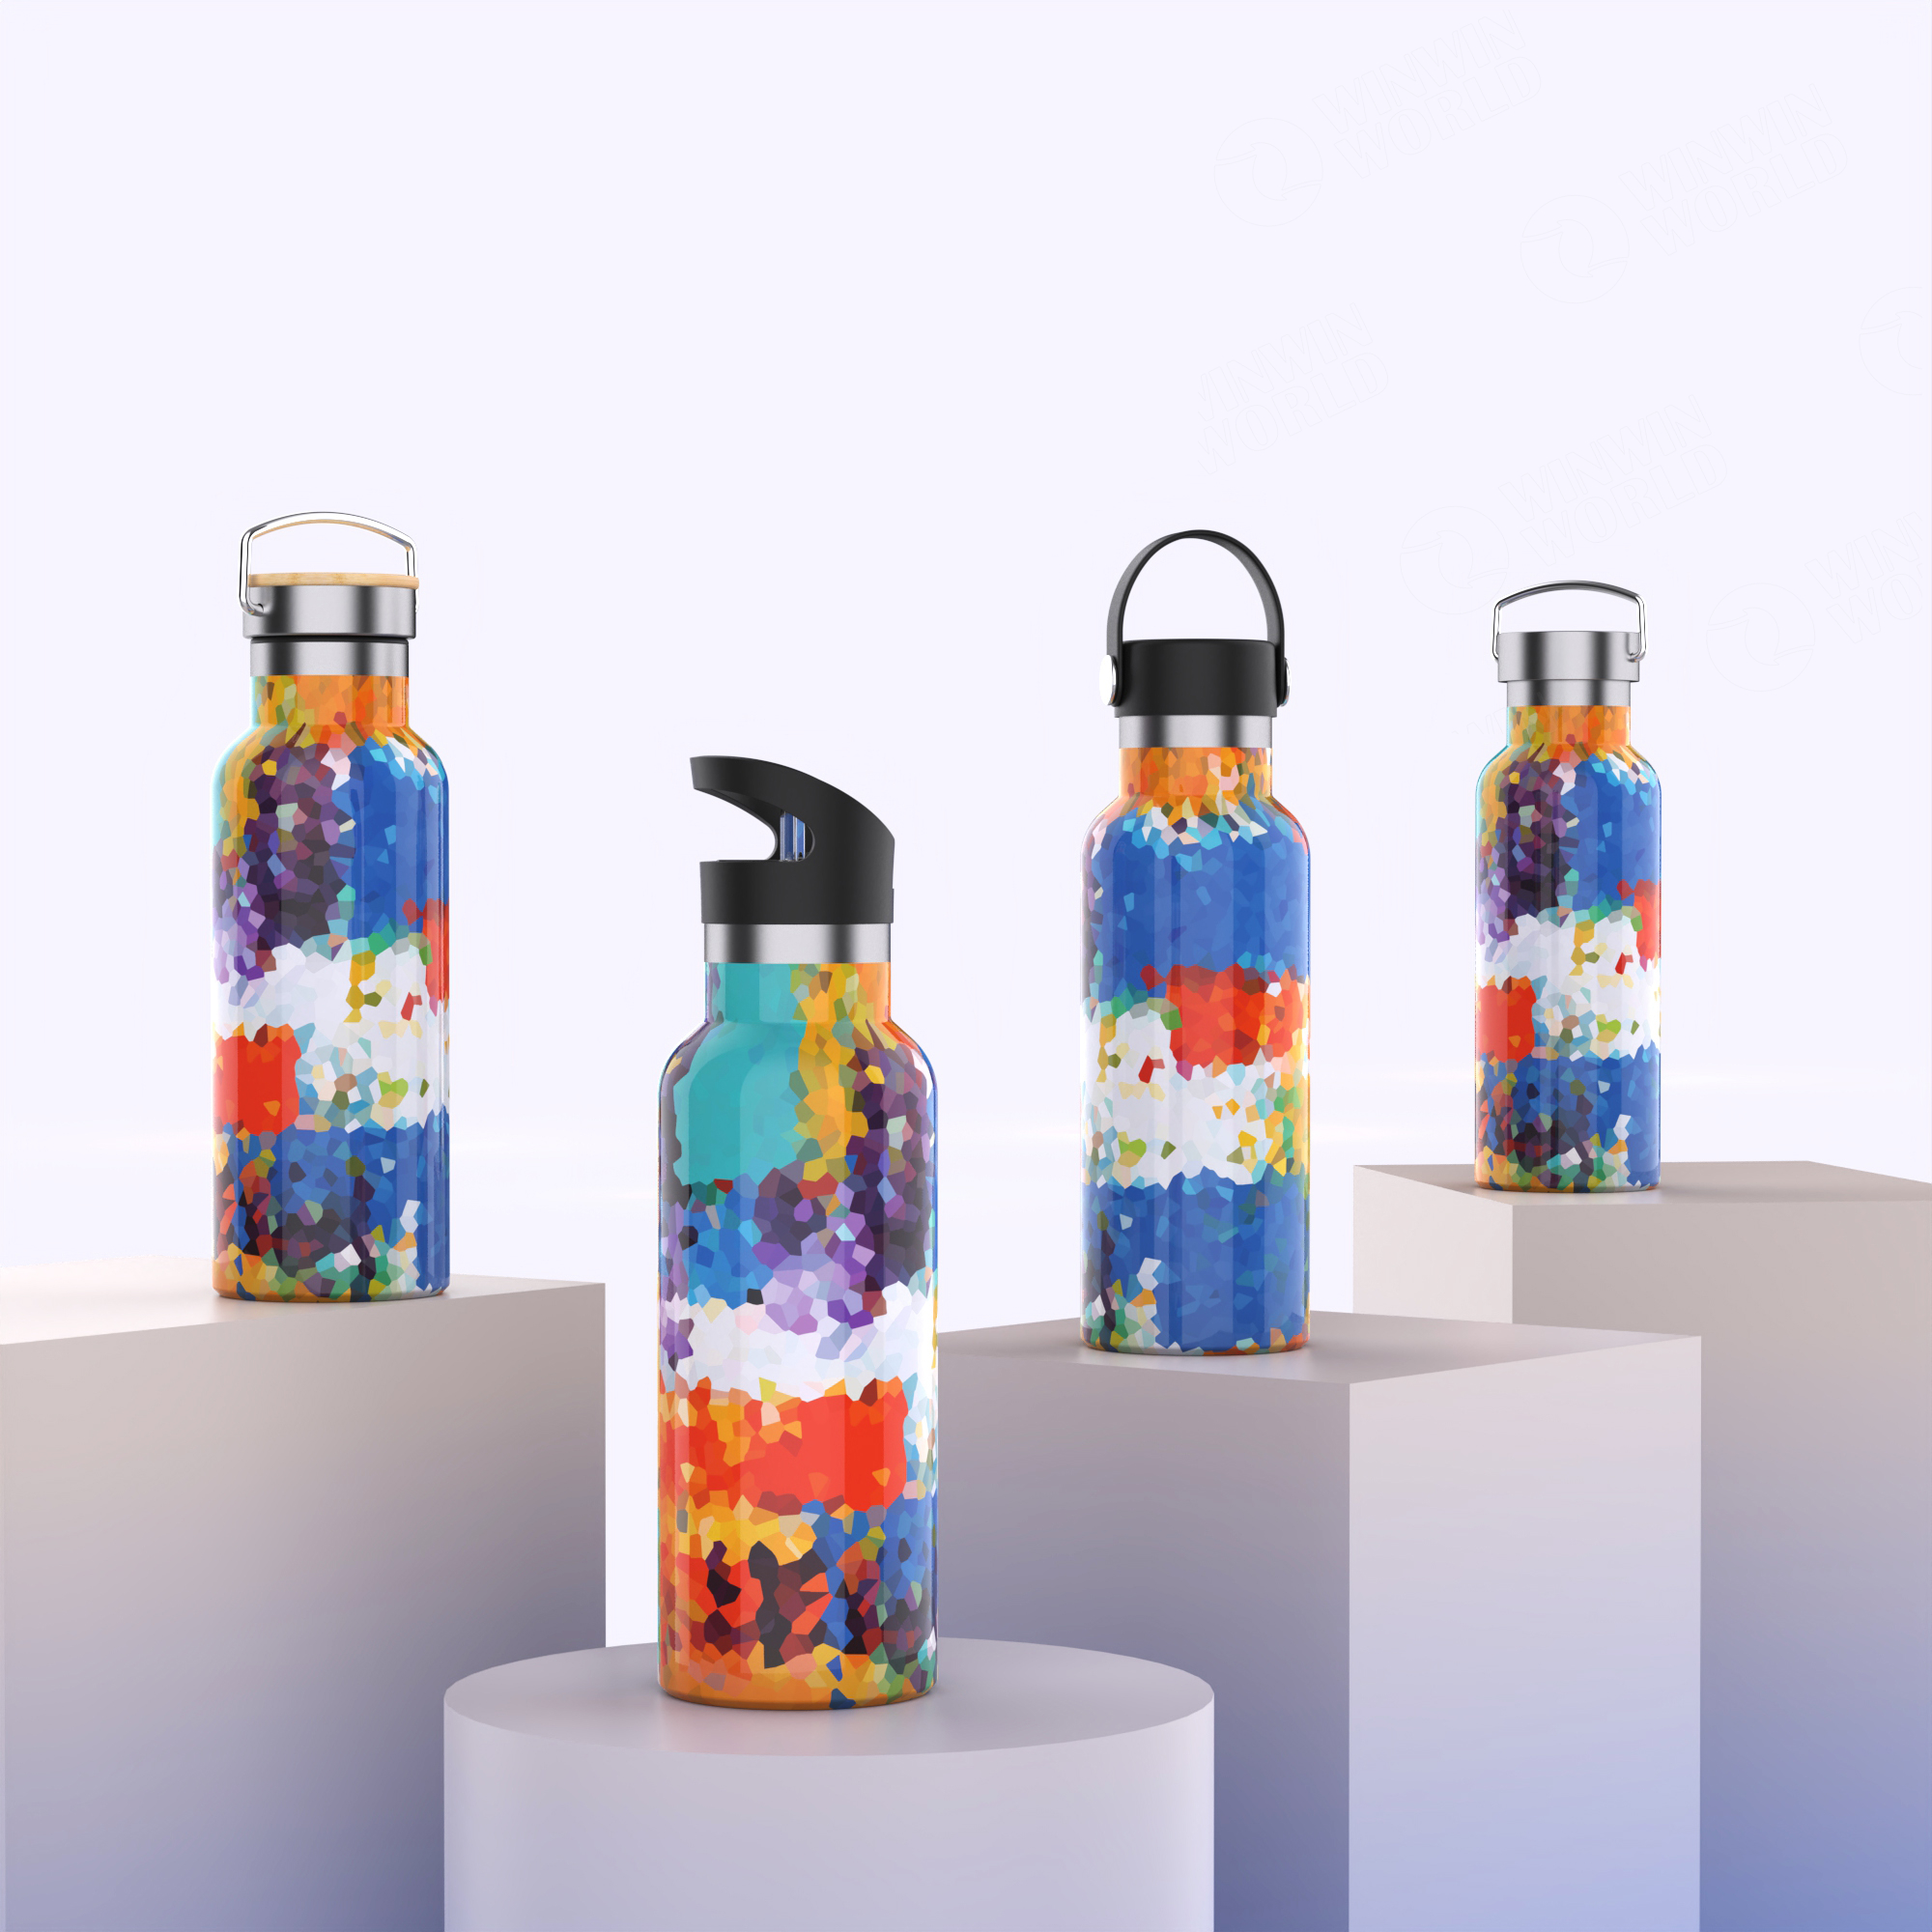 April New Lanuched Pattern Vacuum Flasks &Thermoses Big Capacity Full Bottle Customize Available For Option